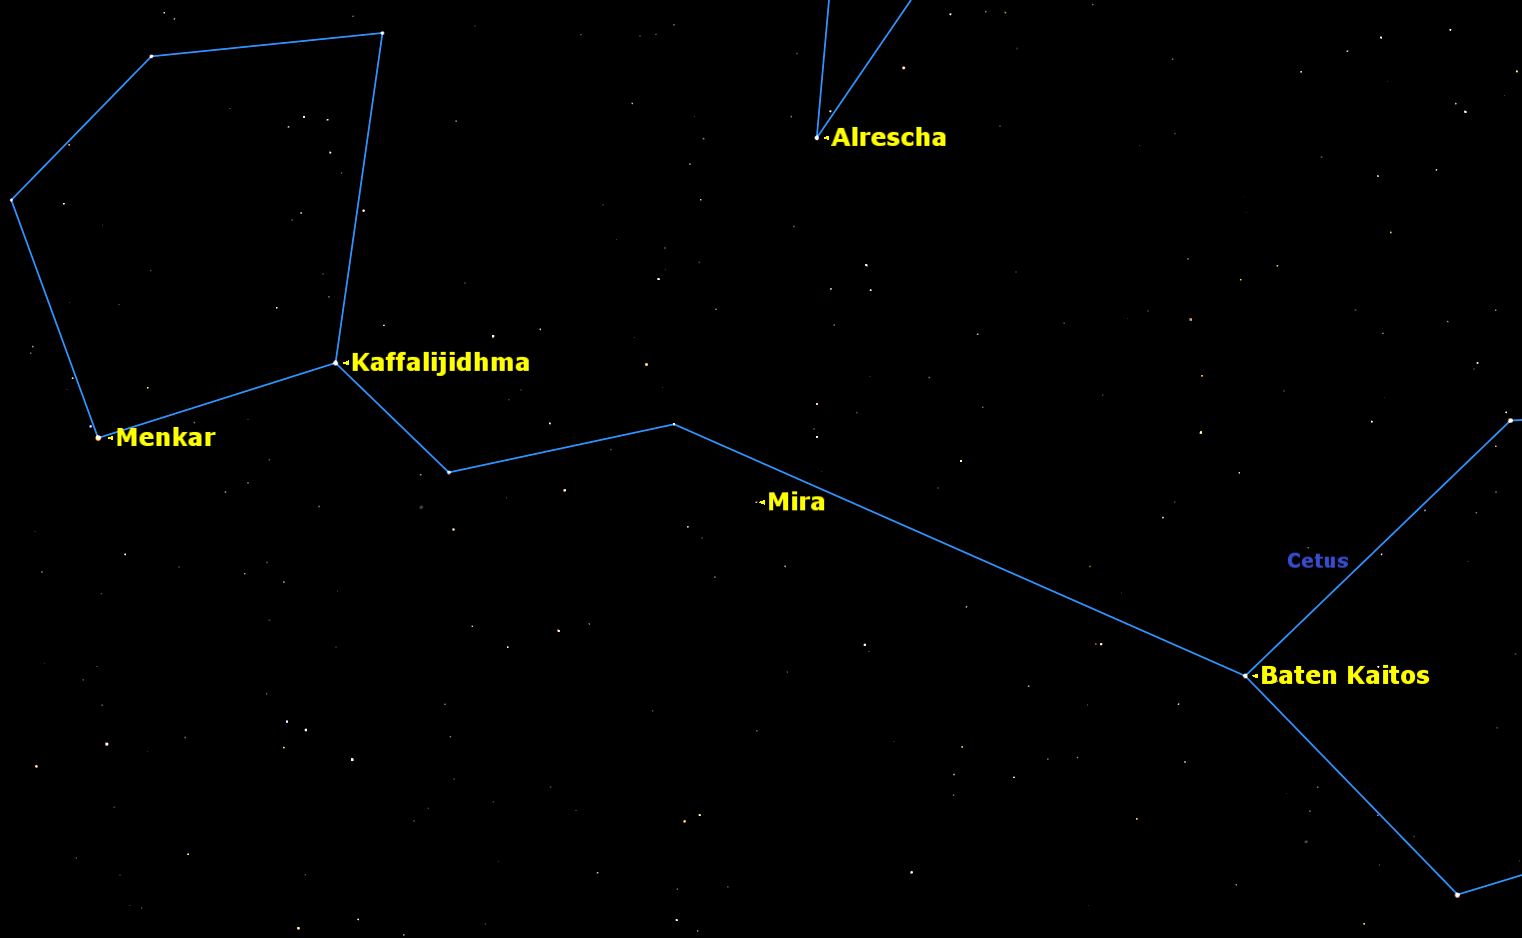 Mira, in the constellation Cetus, is the classic long period variable star, slowly pulsing and changing color over a period of nearly a year. Credit: Starry Night Software.